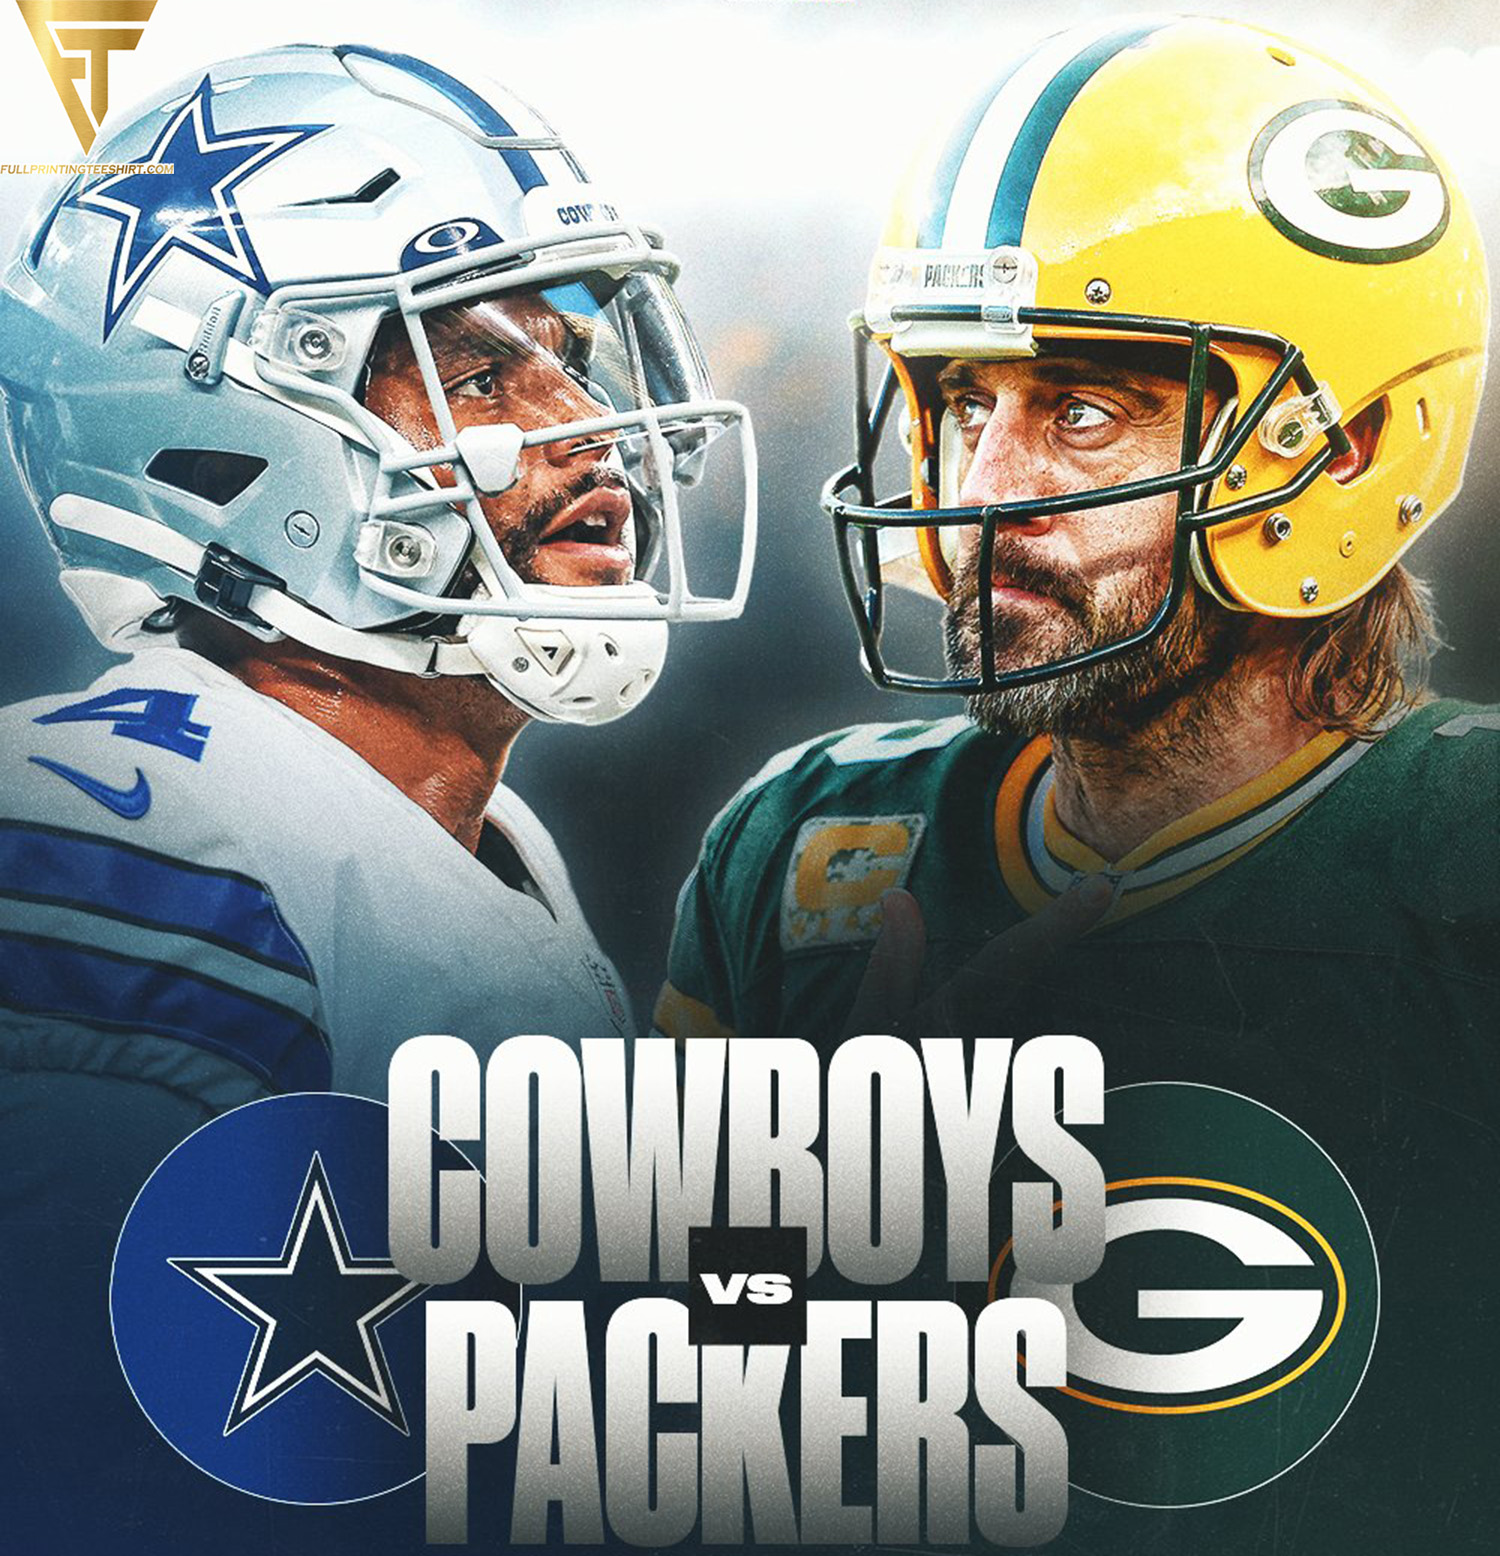 Cowboys vs. Packers NFC Wild Card Playoff Clash at AT&T Stadium - A Preview